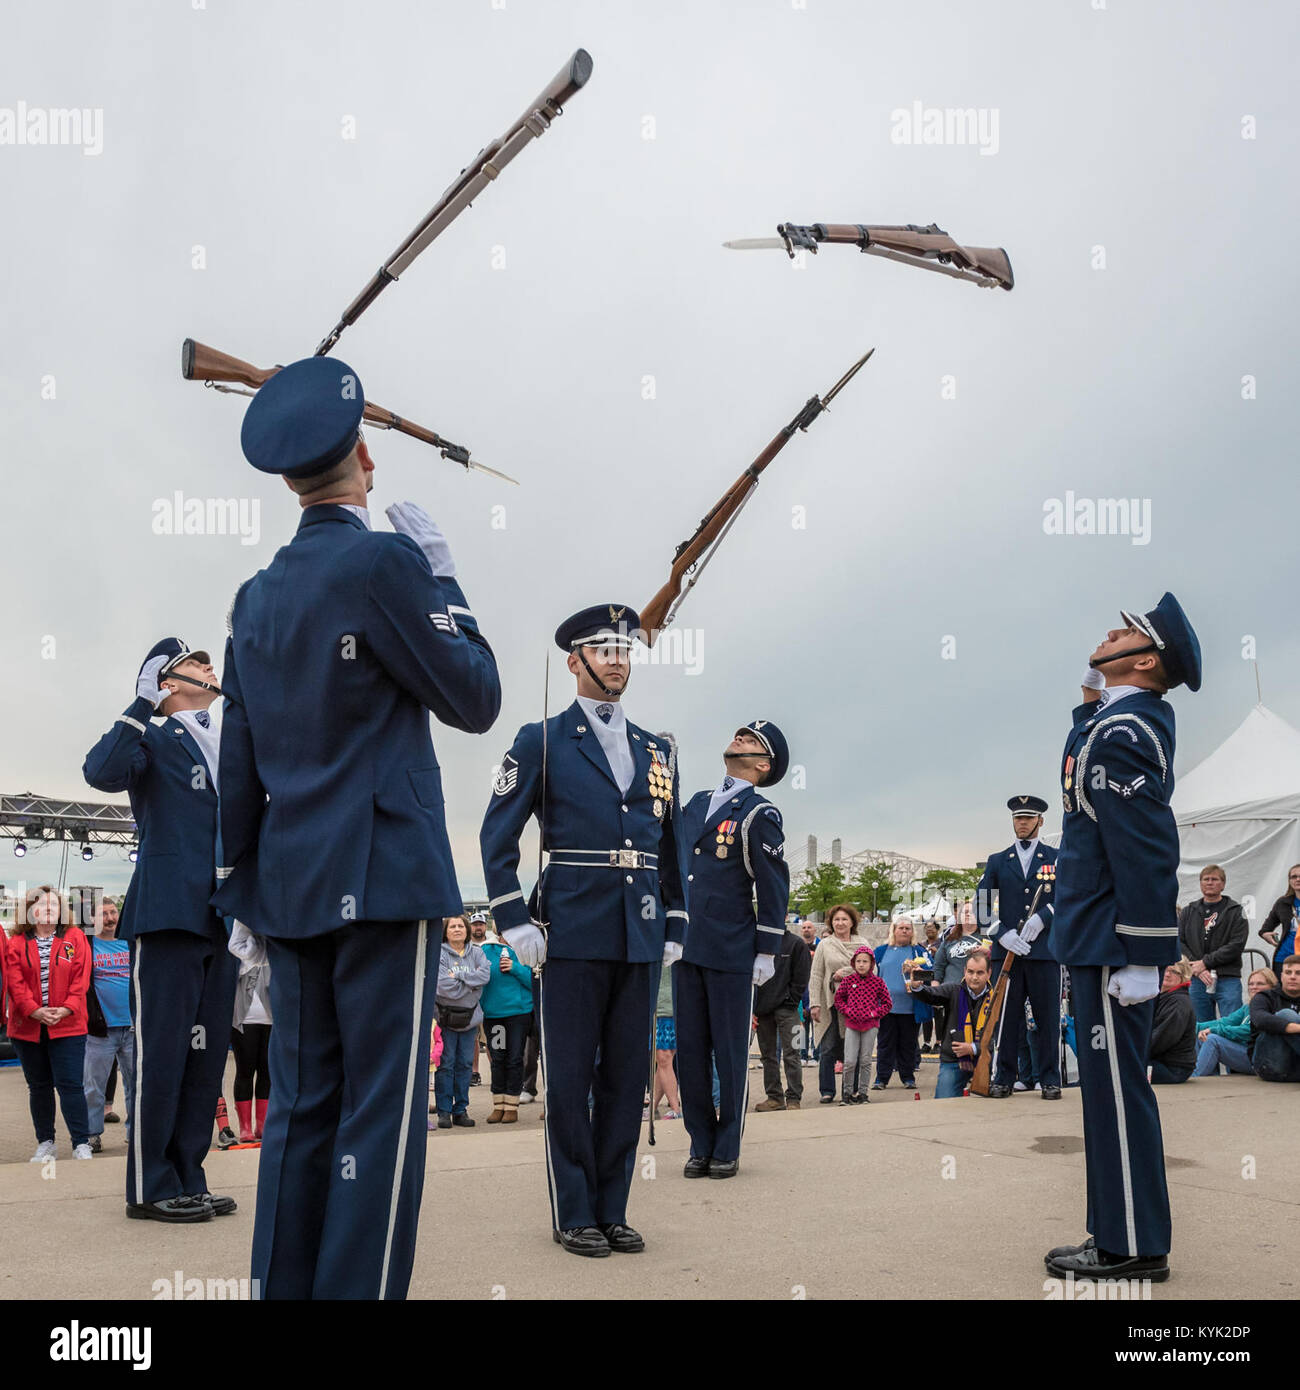 Members of the U.S. Air Force Honor Guard execute a precision rifle drill before an appreciative crowd at Waterfront Park in downtown Louisville, Ky., May 3, 2017, as part of the Kentucky Derby Festival. The Airmen, from Joint Base Anacostia-Bolling in Washington, D.C., strive to represent the Air Force Core Values of integrity, service and excellence through precise drill movements, immaculate appearance and extreme attention to detail. (U.S. Air National Guard photo by Lt. Col. Dale Greer) Stock Photo